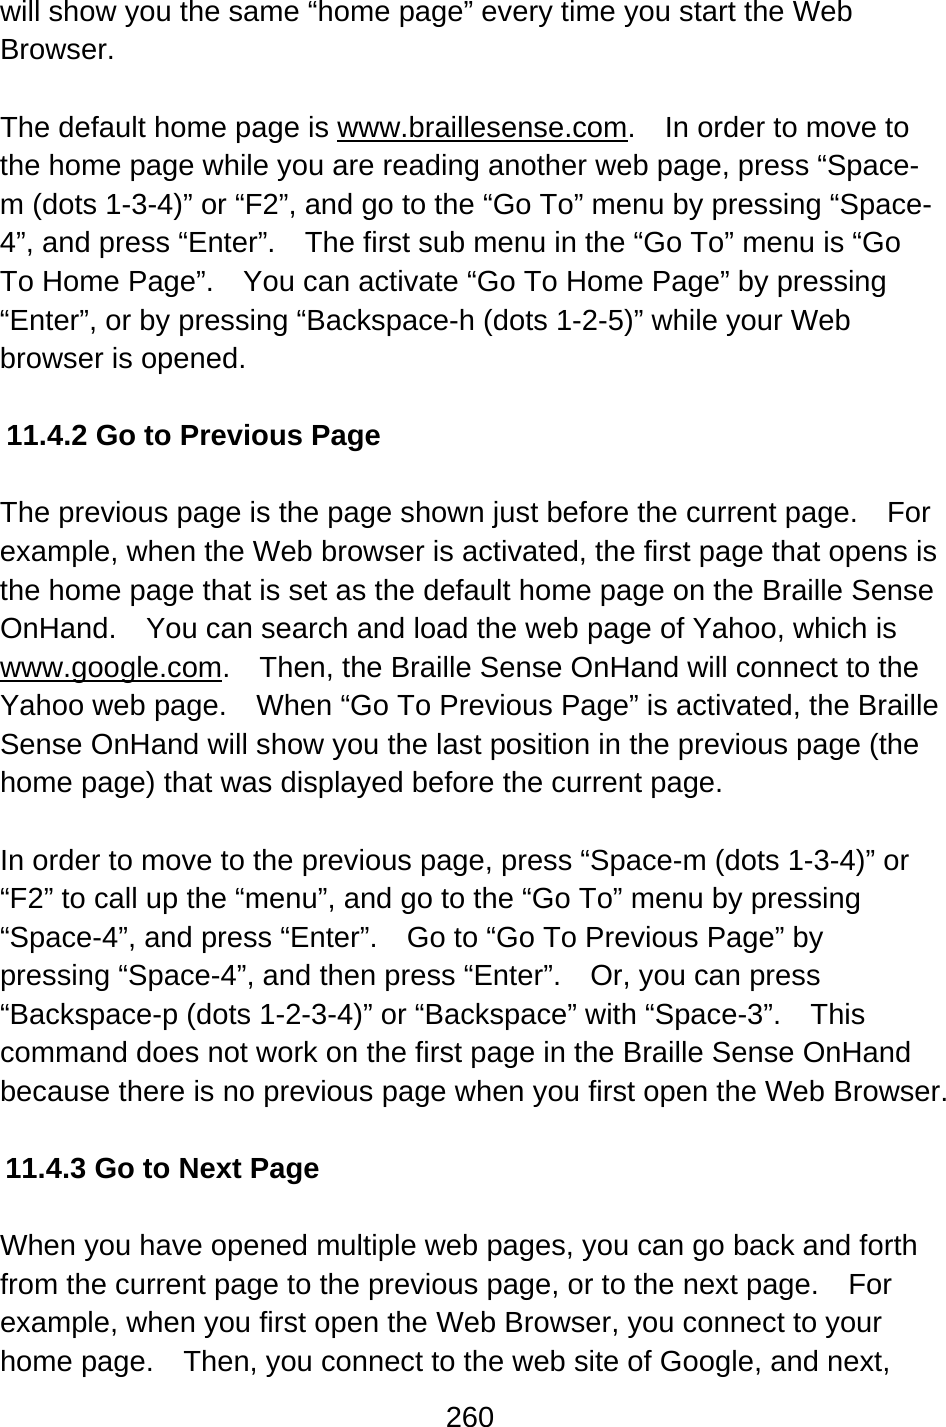 260  will show you the same “home page” every time you start the Web Browser.  The default home page is www.braillesense.com.    In order to move to the home page while you are reading another web page, press “Space-m (dots 1-3-4)” or “F2”, and go to the “Go To” menu by pressing “Space-4”, and press “Enter”.    The first sub menu in the “Go To” menu is “Go To Home Page”.    You can activate “Go To Home Page” by pressing “Enter”, or by pressing “Backspace-h (dots 1-2-5)” while your Web browser is opened.  11.4.2 Go to Previous Page    The previous page is the page shown just before the current page.    For example, when the Web browser is activated, the first page that opens is the home page that is set as the default home page on the Braille Sense OnHand.    You can search and load the web page of Yahoo, which is www.google.com.    Then, the Braille Sense OnHand will connect to the Yahoo web page.    When “Go To Previous Page” is activated, the Braille Sense OnHand will show you the last position in the previous page (the home page) that was displayed before the current page.  In order to move to the previous page, press “Space-m (dots 1-3-4)” or “F2” to call up the “menu”, and go to the “Go To” menu by pressing “Space-4”, and press “Enter”.    Go to “Go To Previous Page” by pressing “Space-4”, and then press “Enter”.    Or, you can press “Backspace-p (dots 1-2-3-4)” or “Backspace” with “Space-3”.    This command does not work on the first page in the Braille Sense OnHand because there is no previous page when you first open the Web Browser.  11.4.3 Go to Next Page  When you have opened multiple web pages, you can go back and forth from the current page to the previous page, or to the next page.    For example, when you first open the Web Browser, you connect to your home page.    Then, you connect to the web site of Google, and next, 